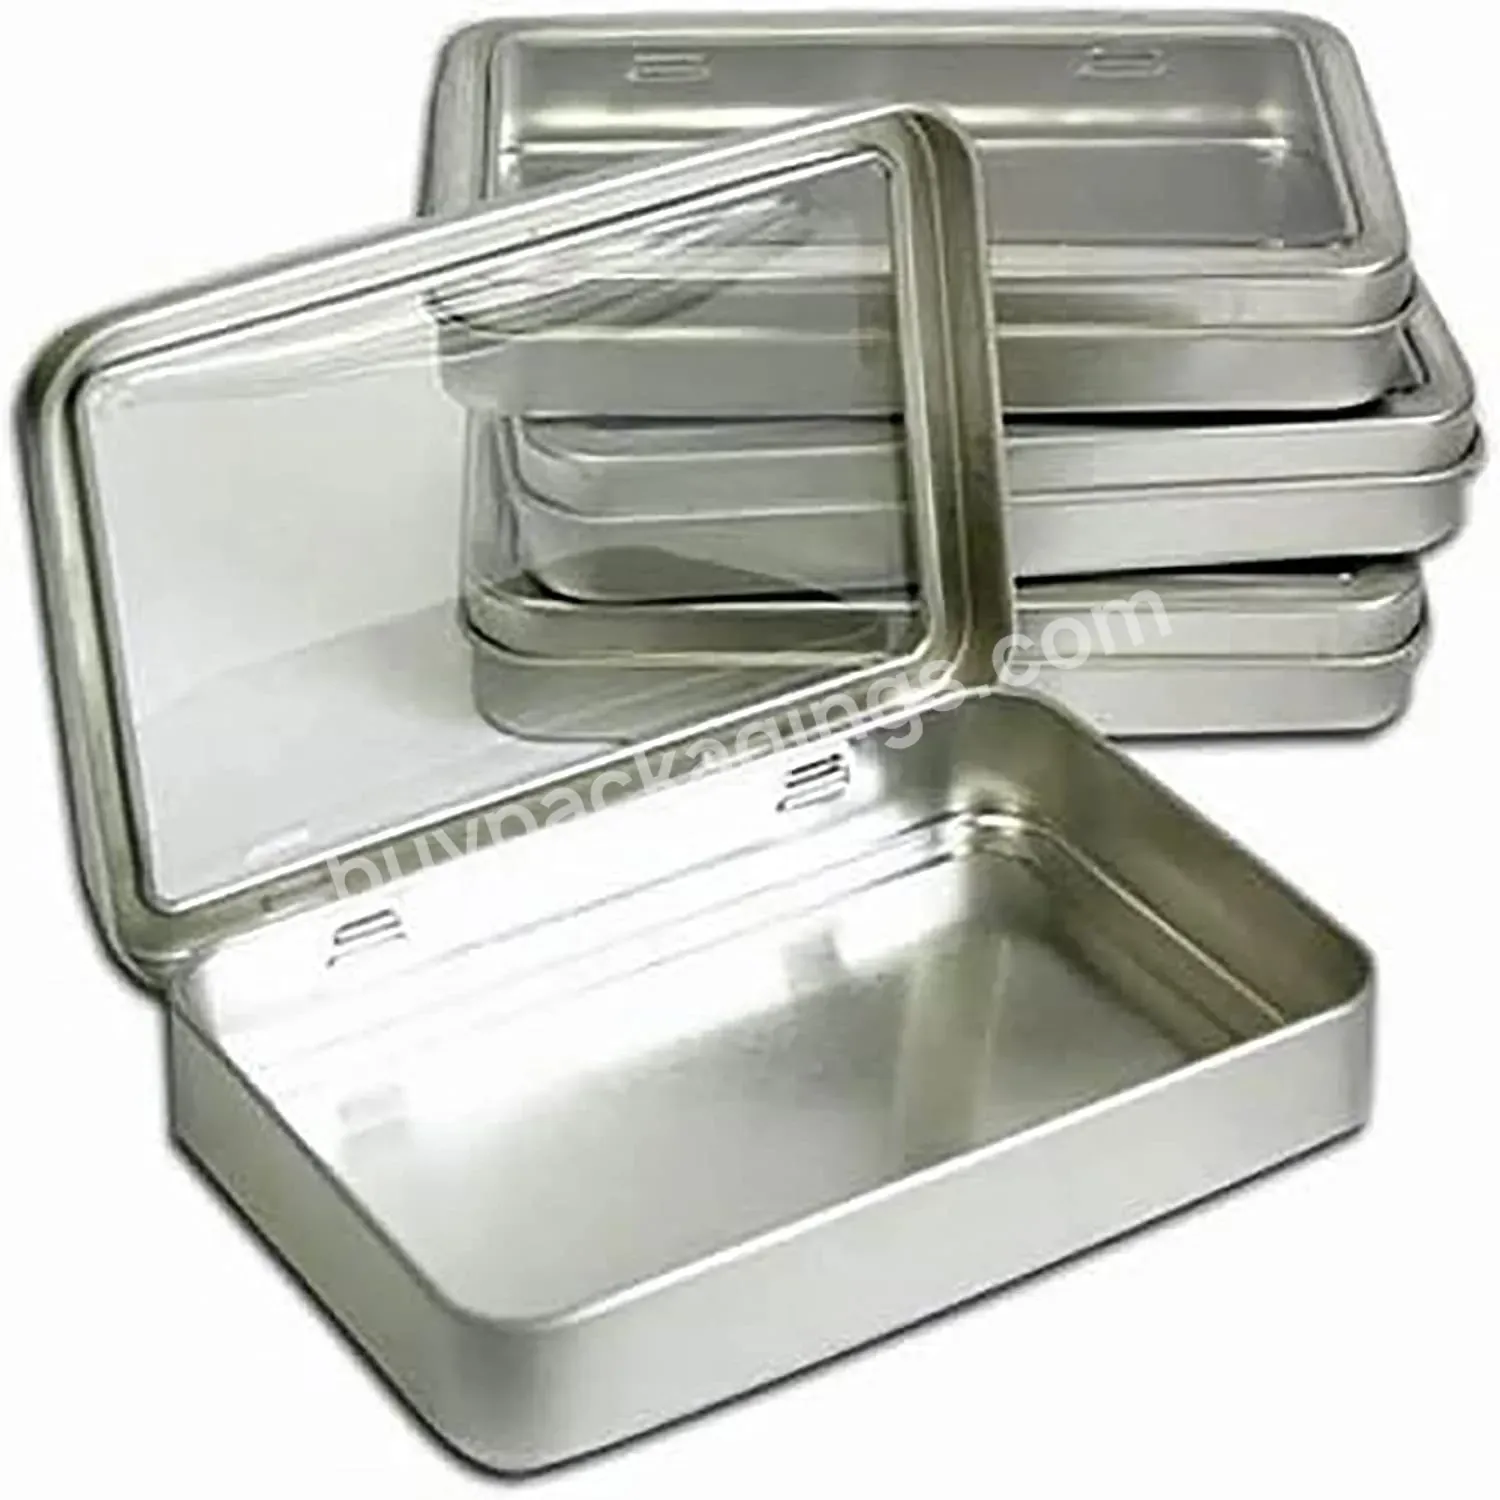 Clear Top Metal Tin Box 7oz Plain Silver Hinged Blank Storage Case,Crafts,Survival Kit Tins 5.5x3.5x0.9 Inch 137x90x23mm - Buy Seamless Tinplate Case Rectangle Shape / Hinged Tin Case With Window Lid,Storage Tin Case With Hinged Window Lid,Thin Metal